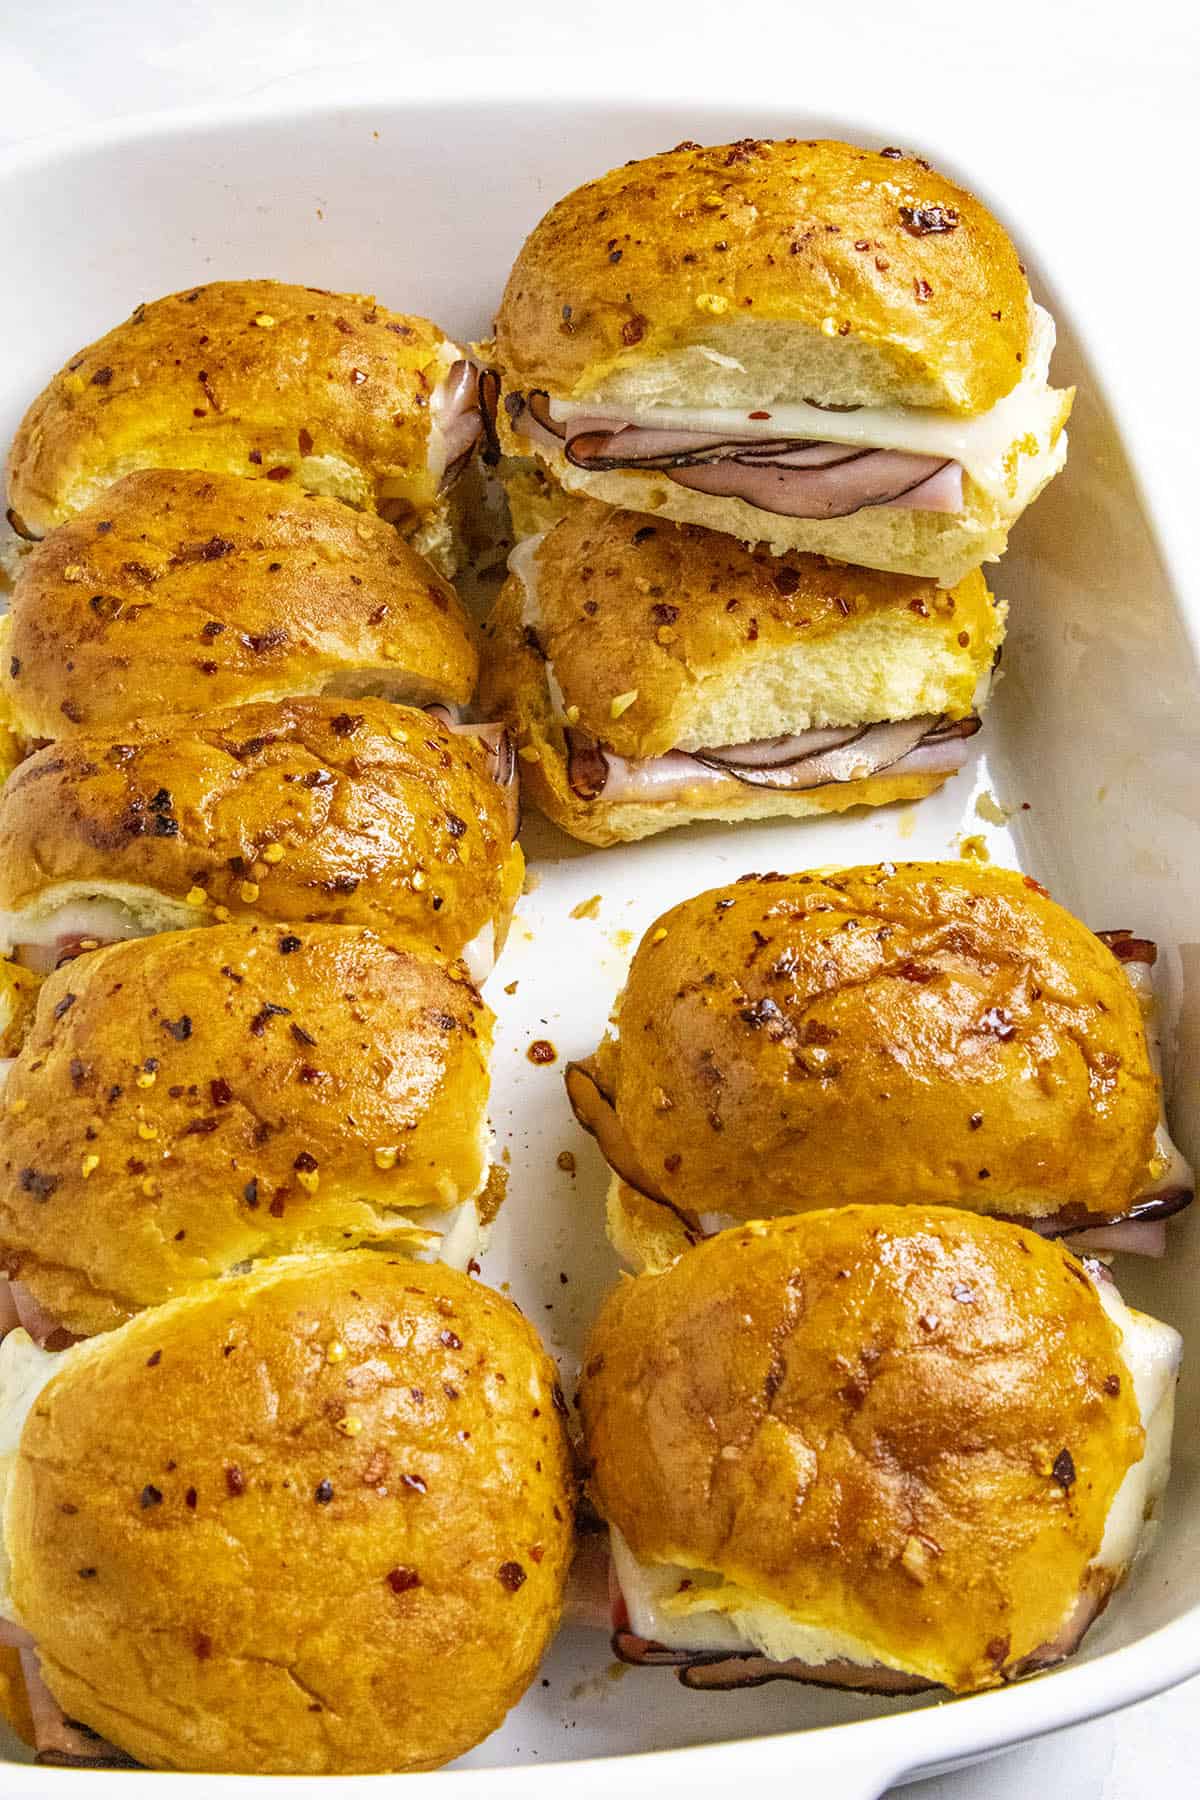 Spicy Crack Ham and Cheese Sliders looking extremely delicious.